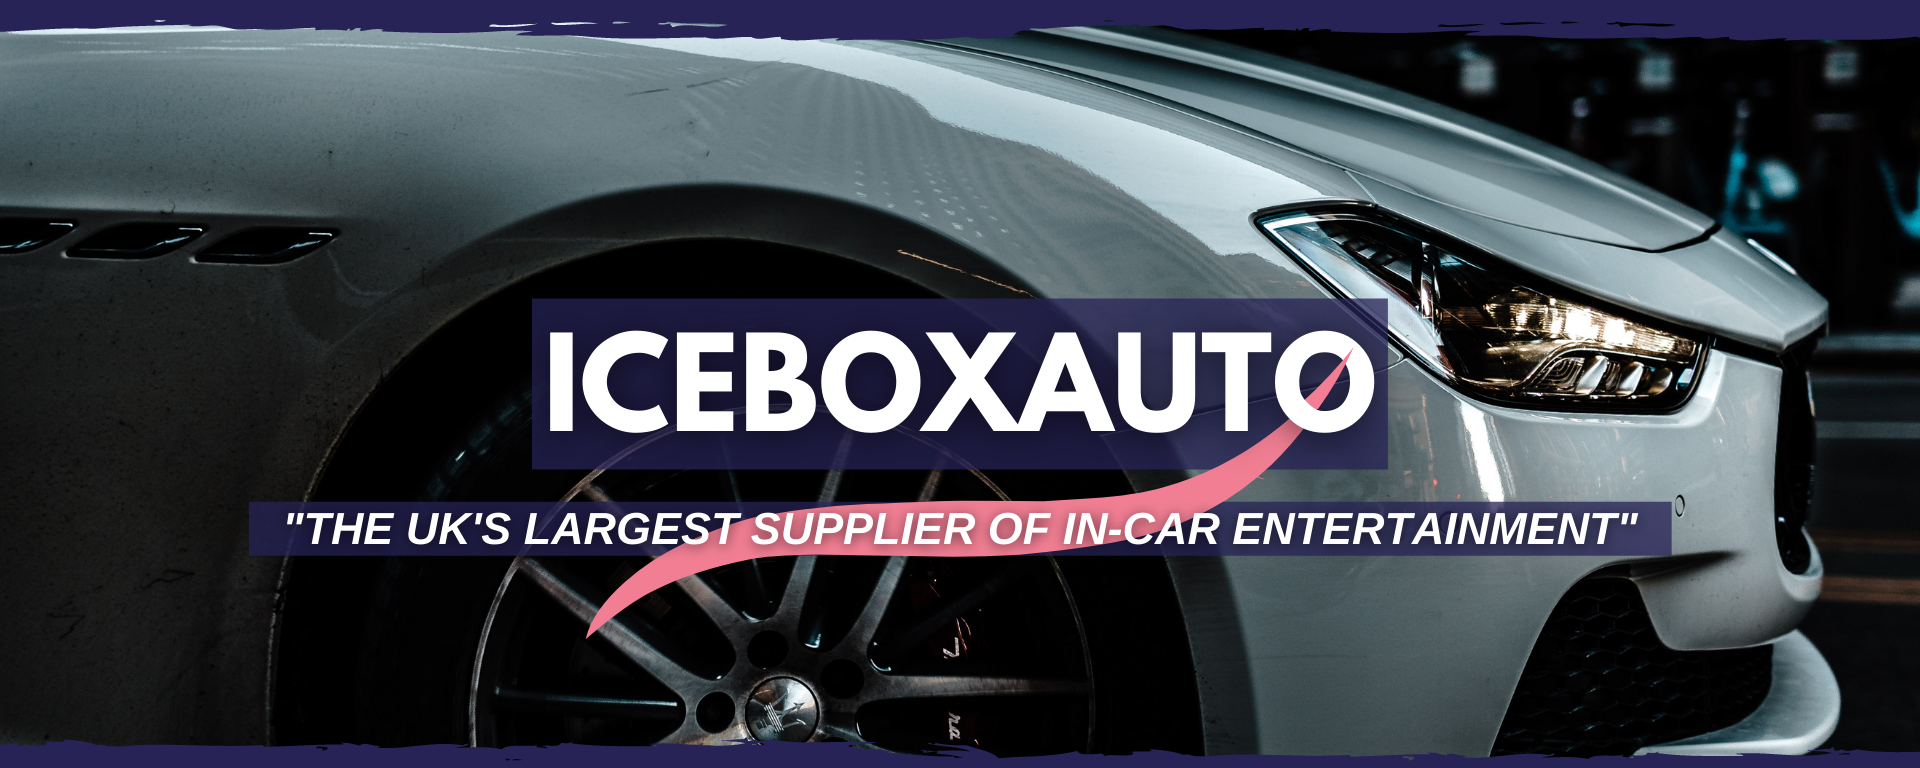 Iceboxauto, is the Largest supplier of in-car entertainment systems in Europe, Vauxhall Insignia, Audi, Peugeot in-car entertainment systems here, Tesla Style and OEM DAB radio provider